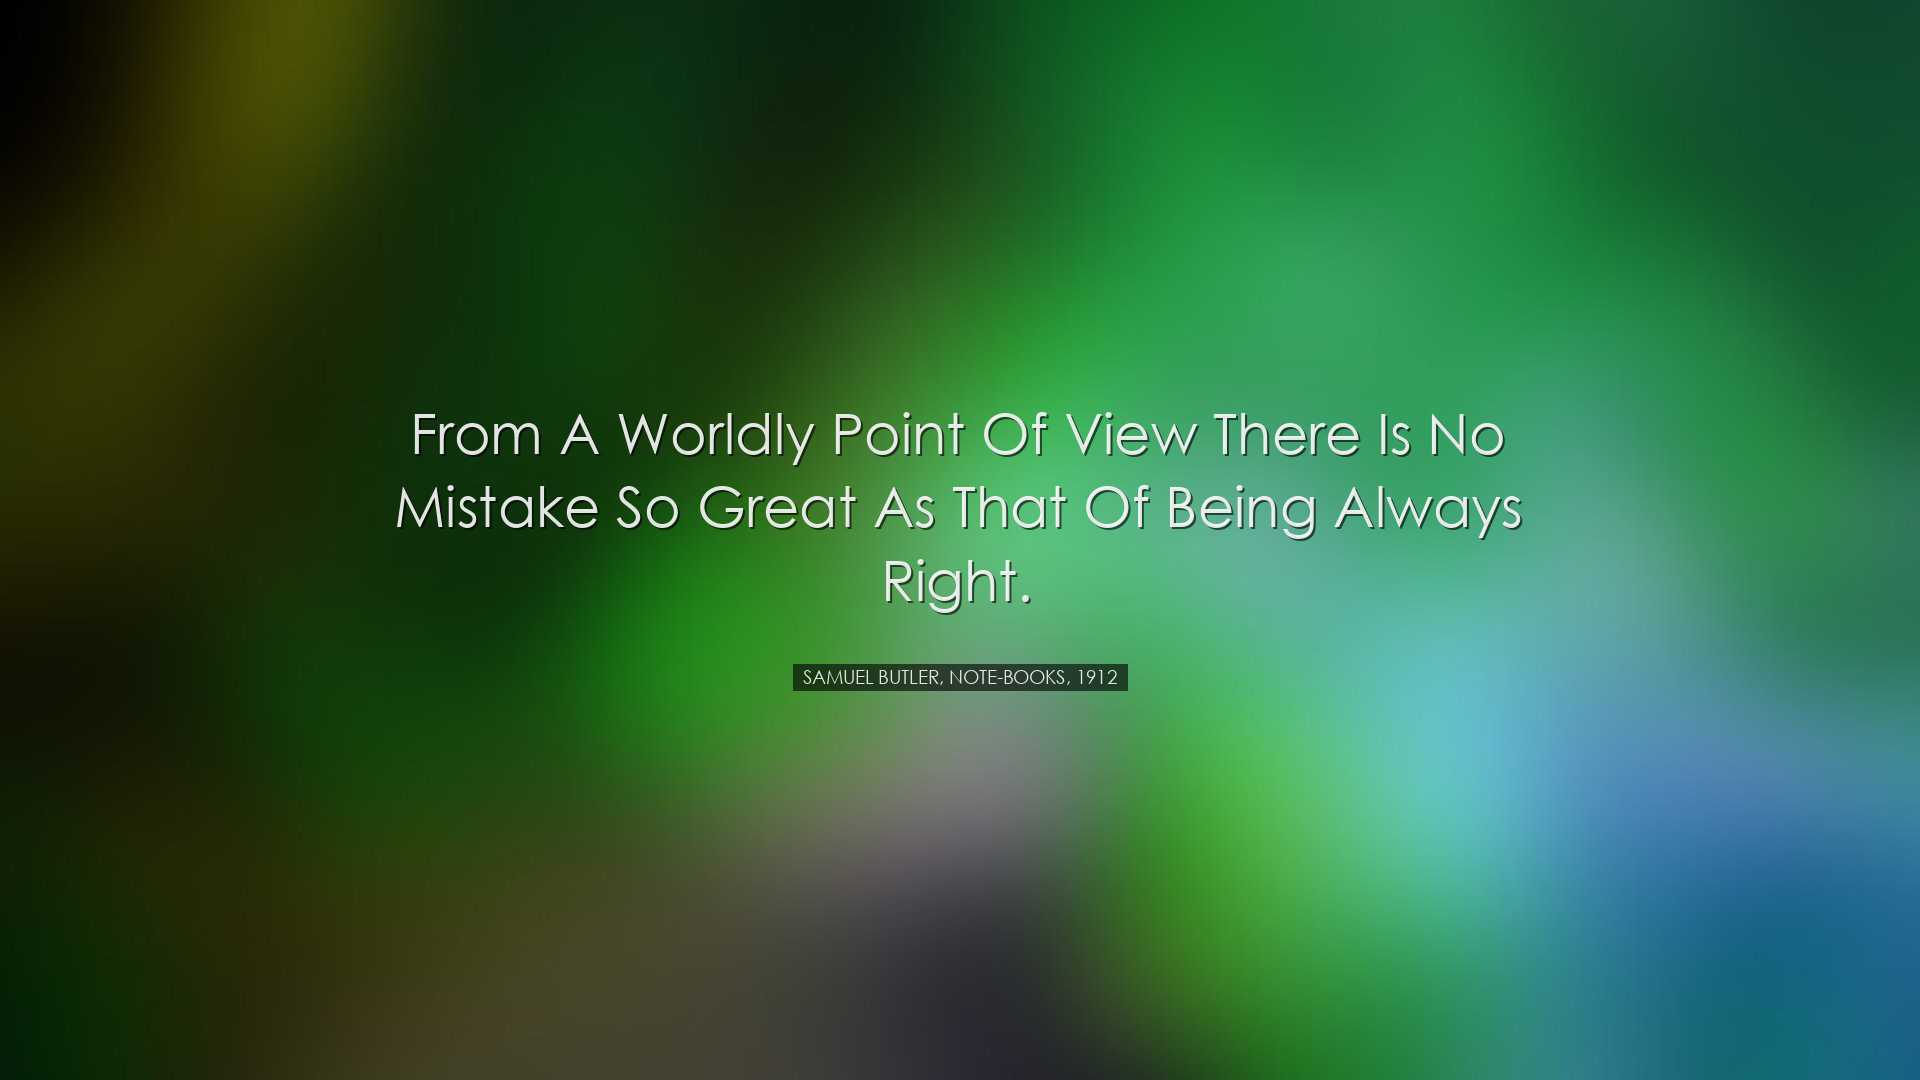 From a worldly point of view there is no mistake so great as that